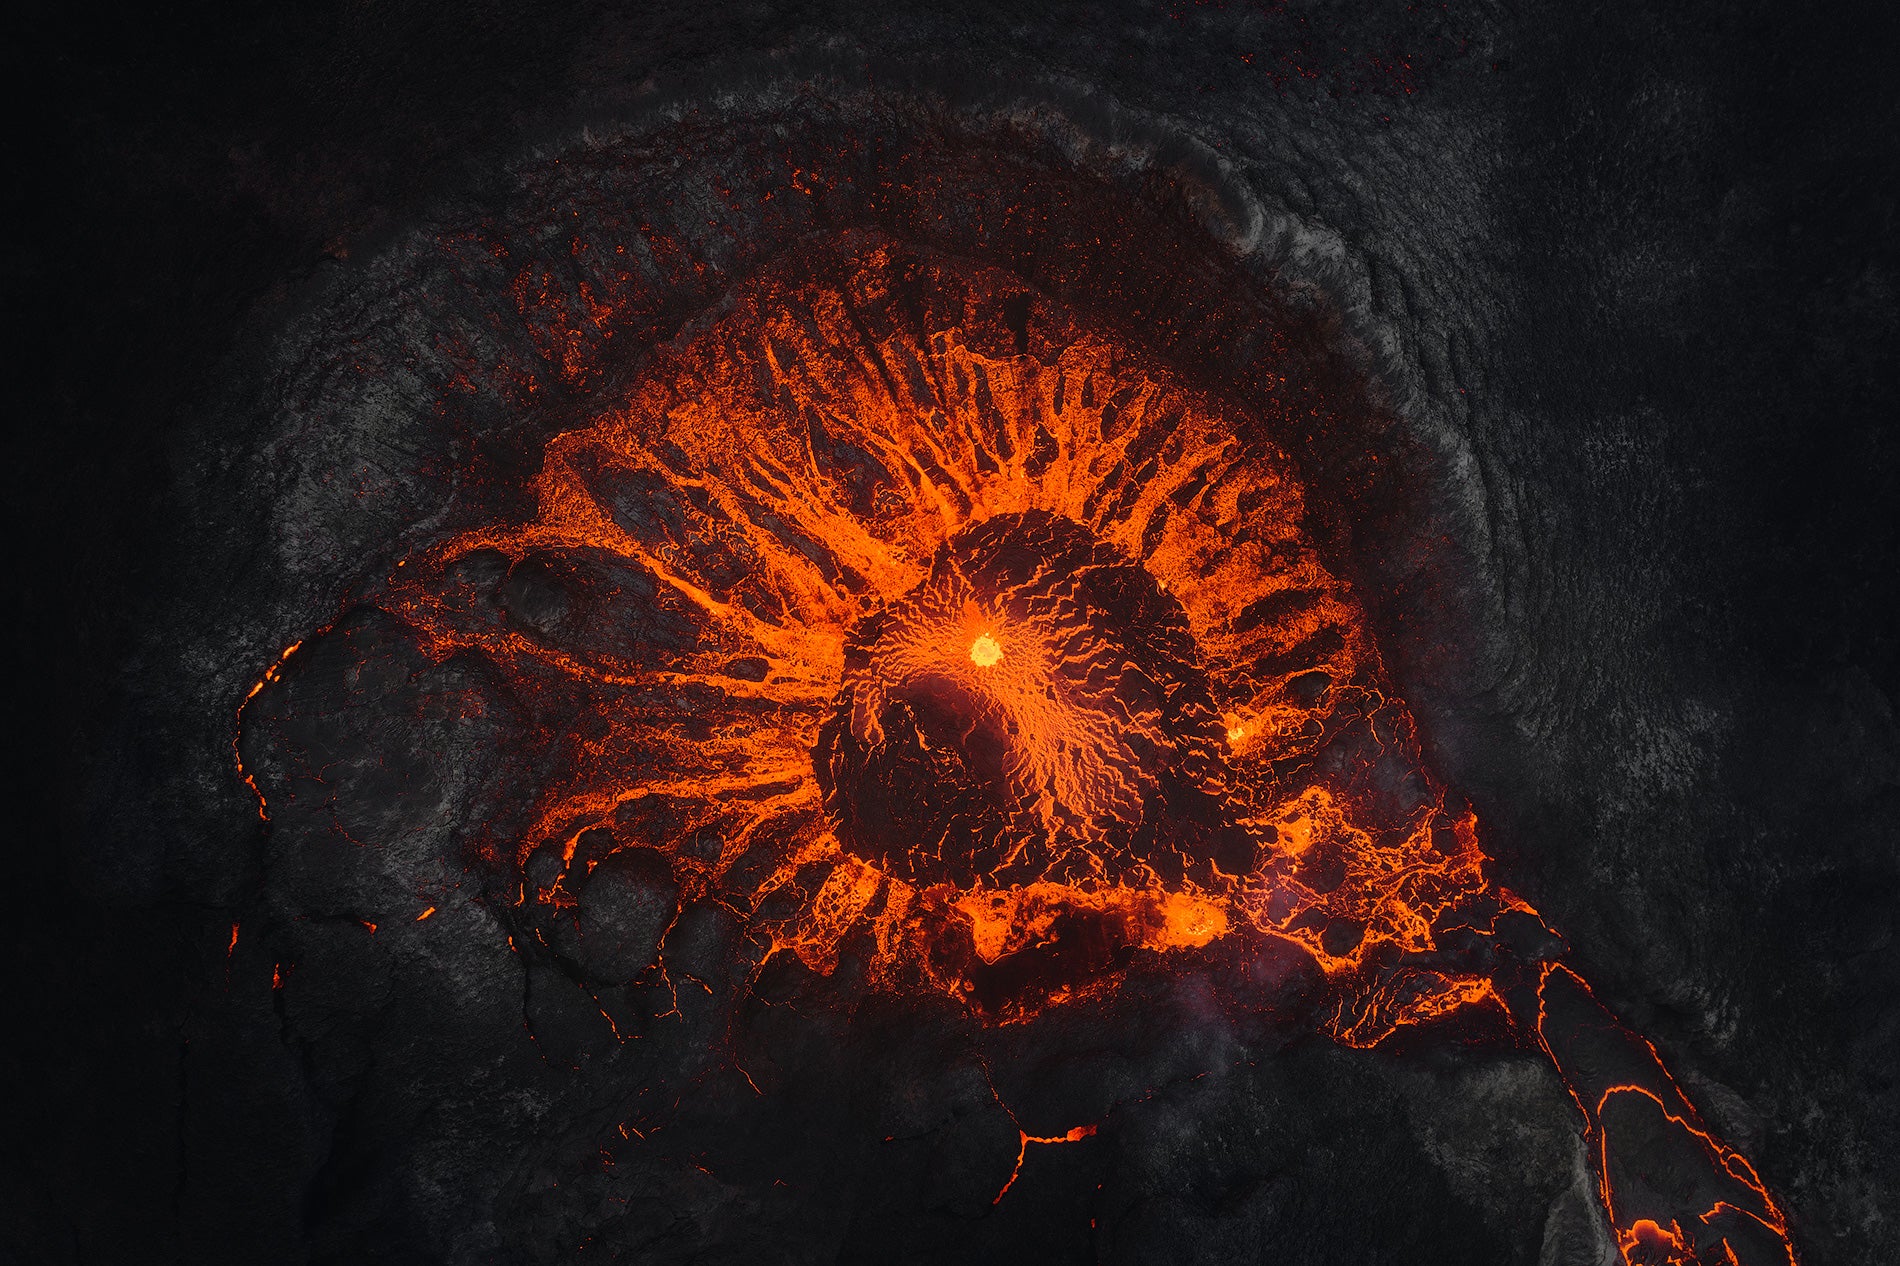 Eye of Sauron featured opacity image